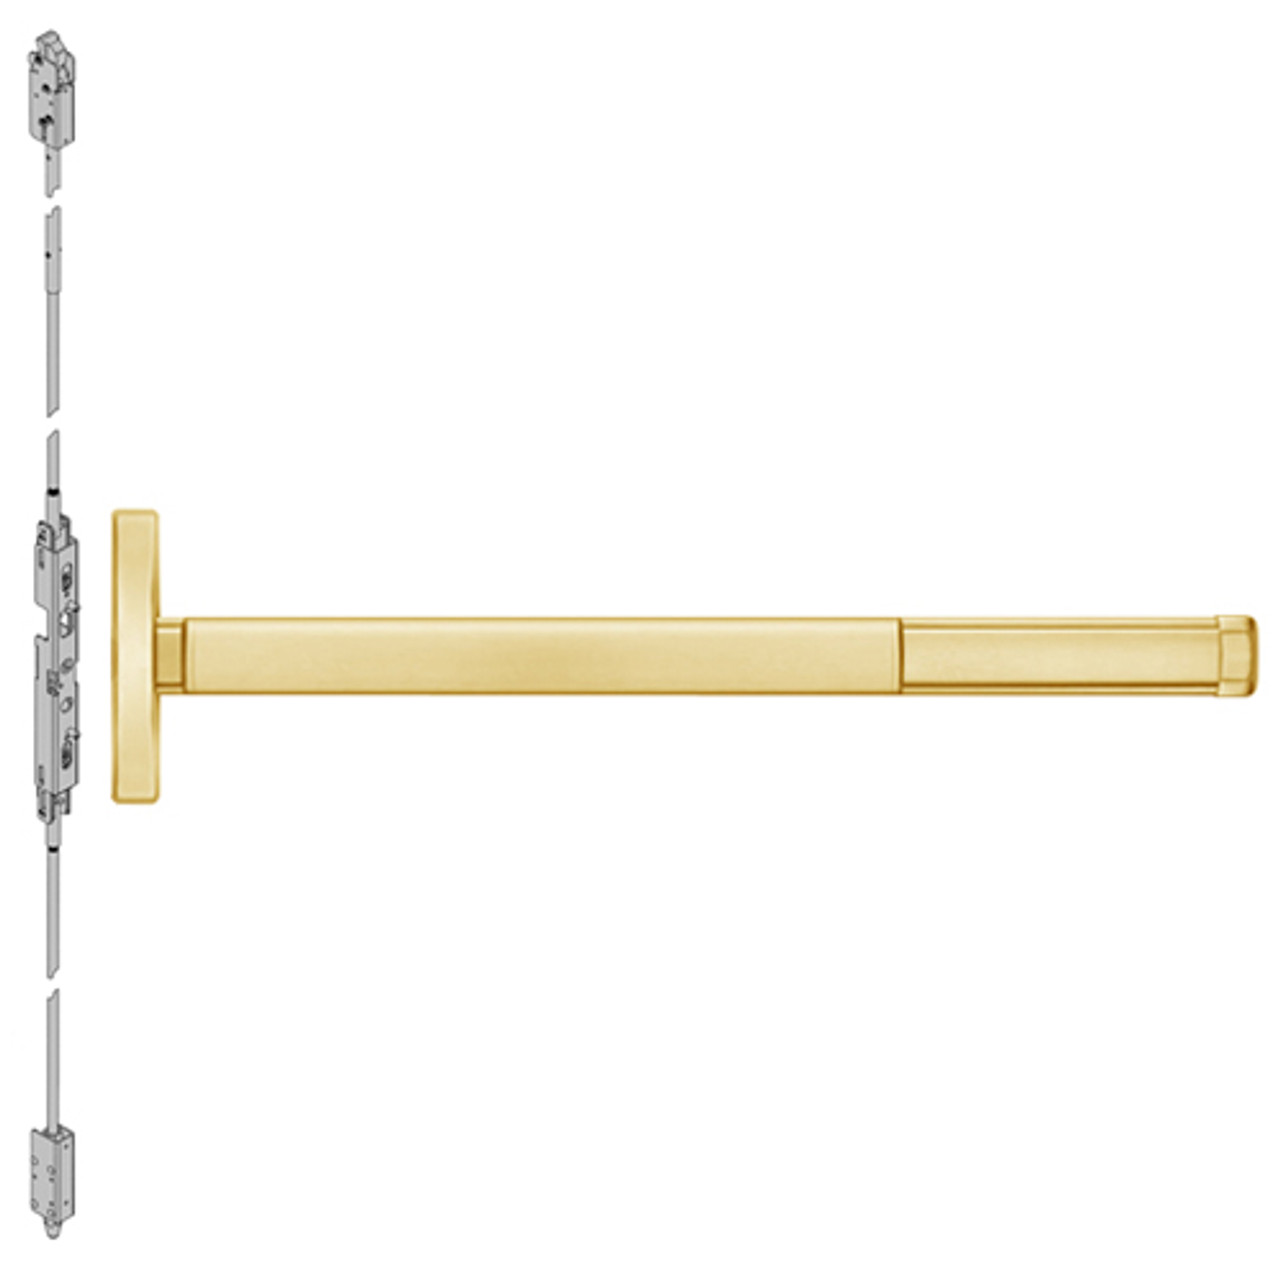 2601LBR-605-48 PHI 2600 Series Non Fire Rated Concealed Vertical Rod Exit Device Prepped for Cover Plate with Less Bottom Rod in Bright Brass Finish